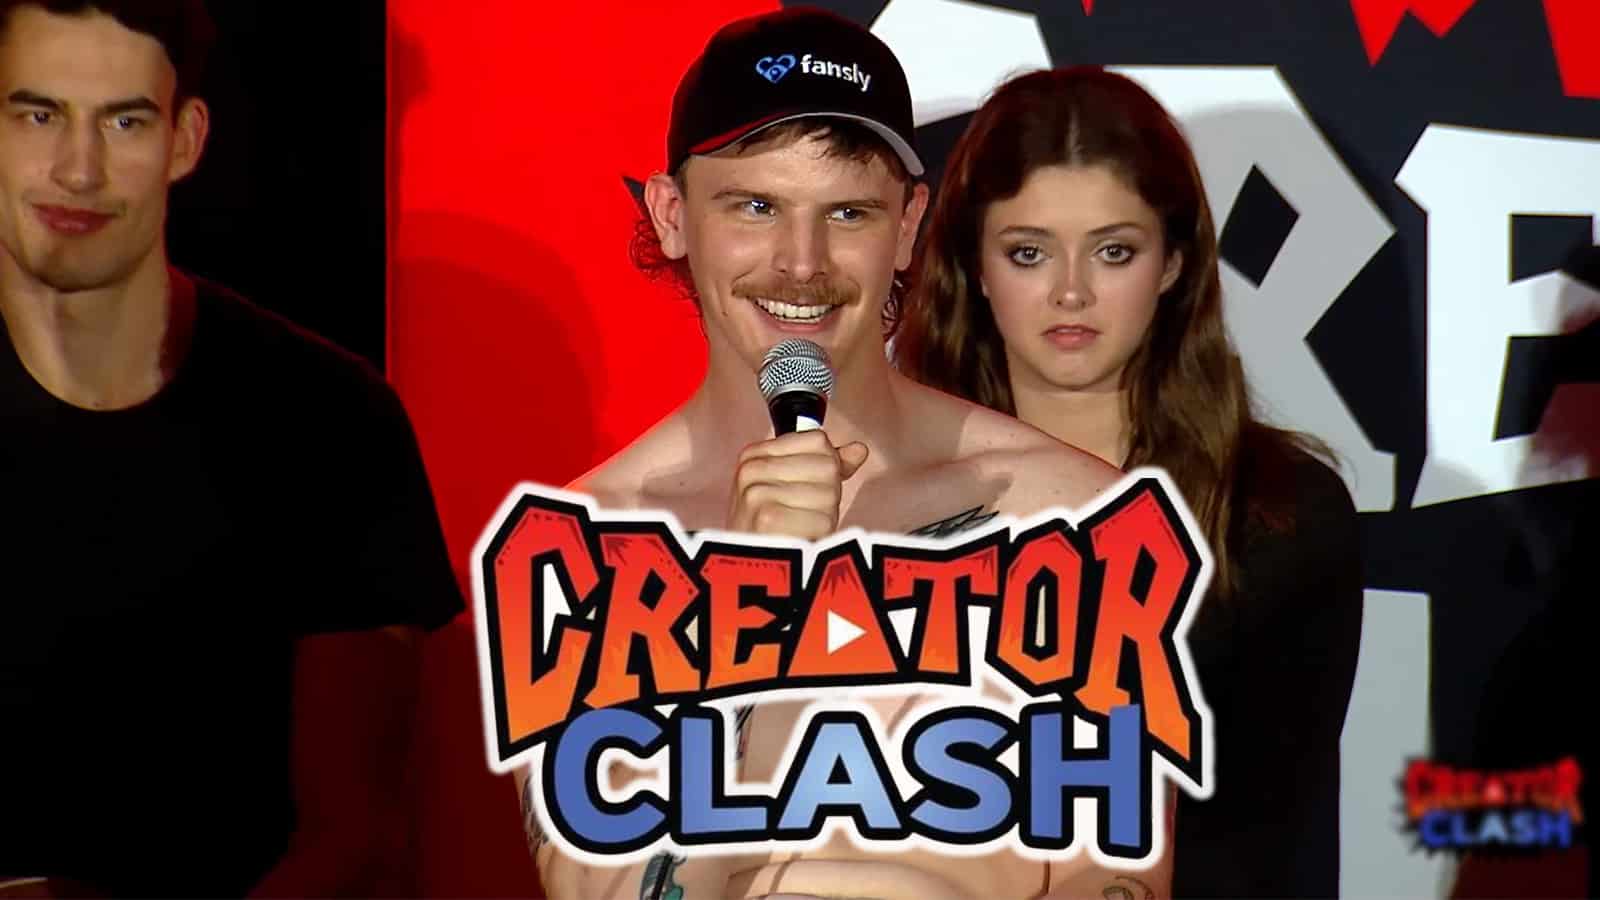 Creator Clash 2 (Streamers/Influencer Boxing for Charity)